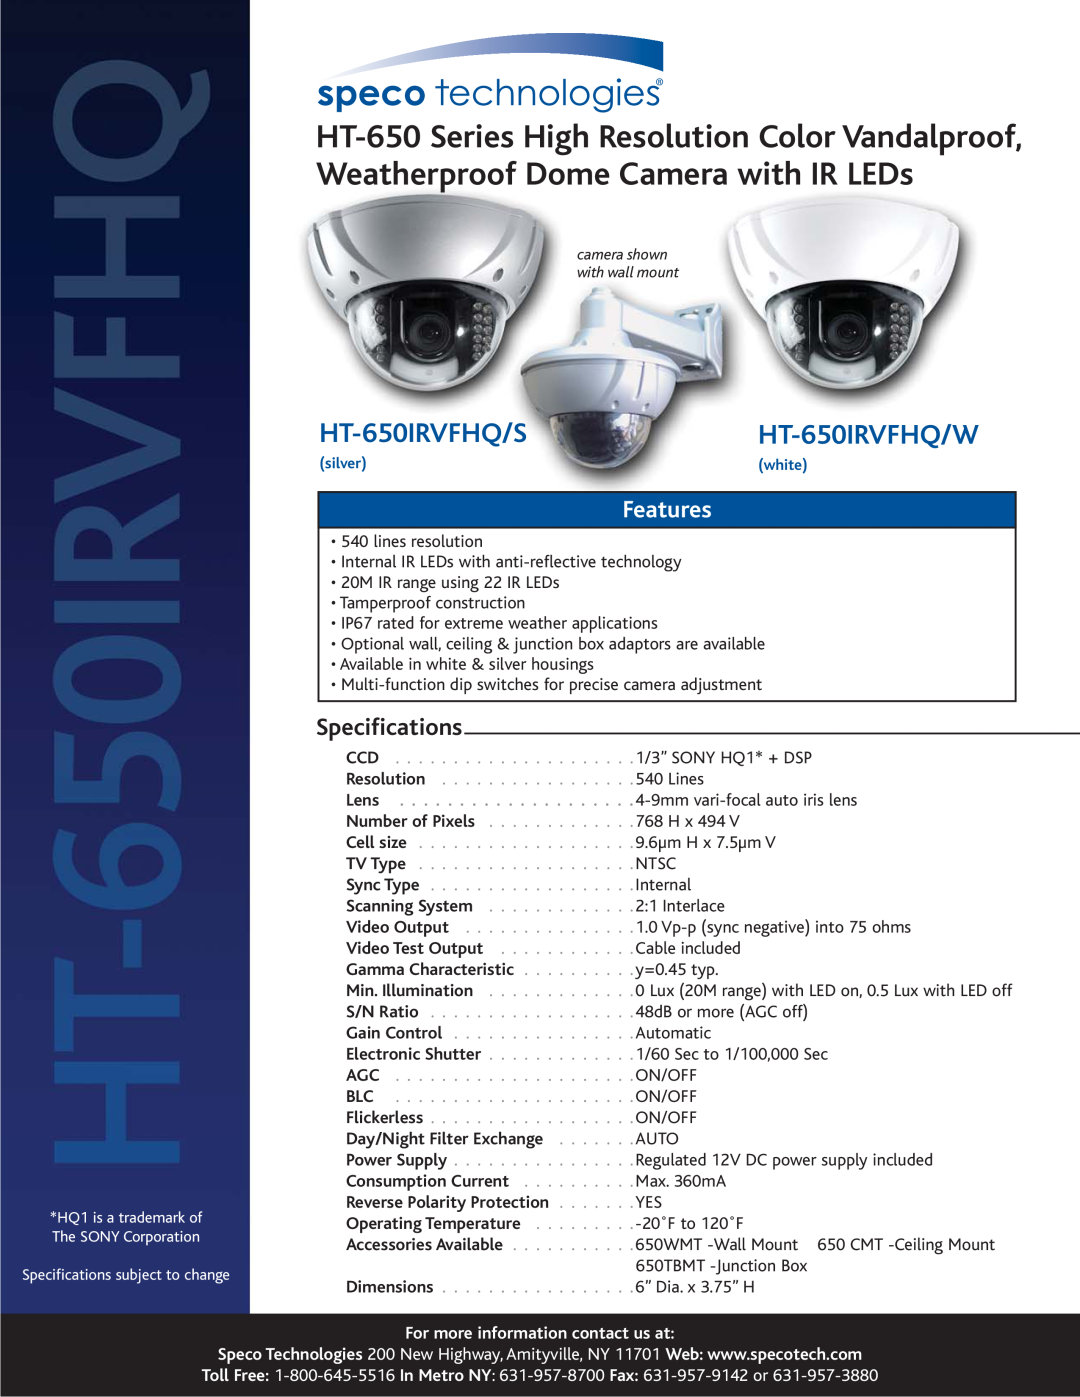 Speco Technologies specifications HT-650IRVFHQ/SHT-650IRVFHQ/W, Features, Specifications, Lens, Consumption Current 